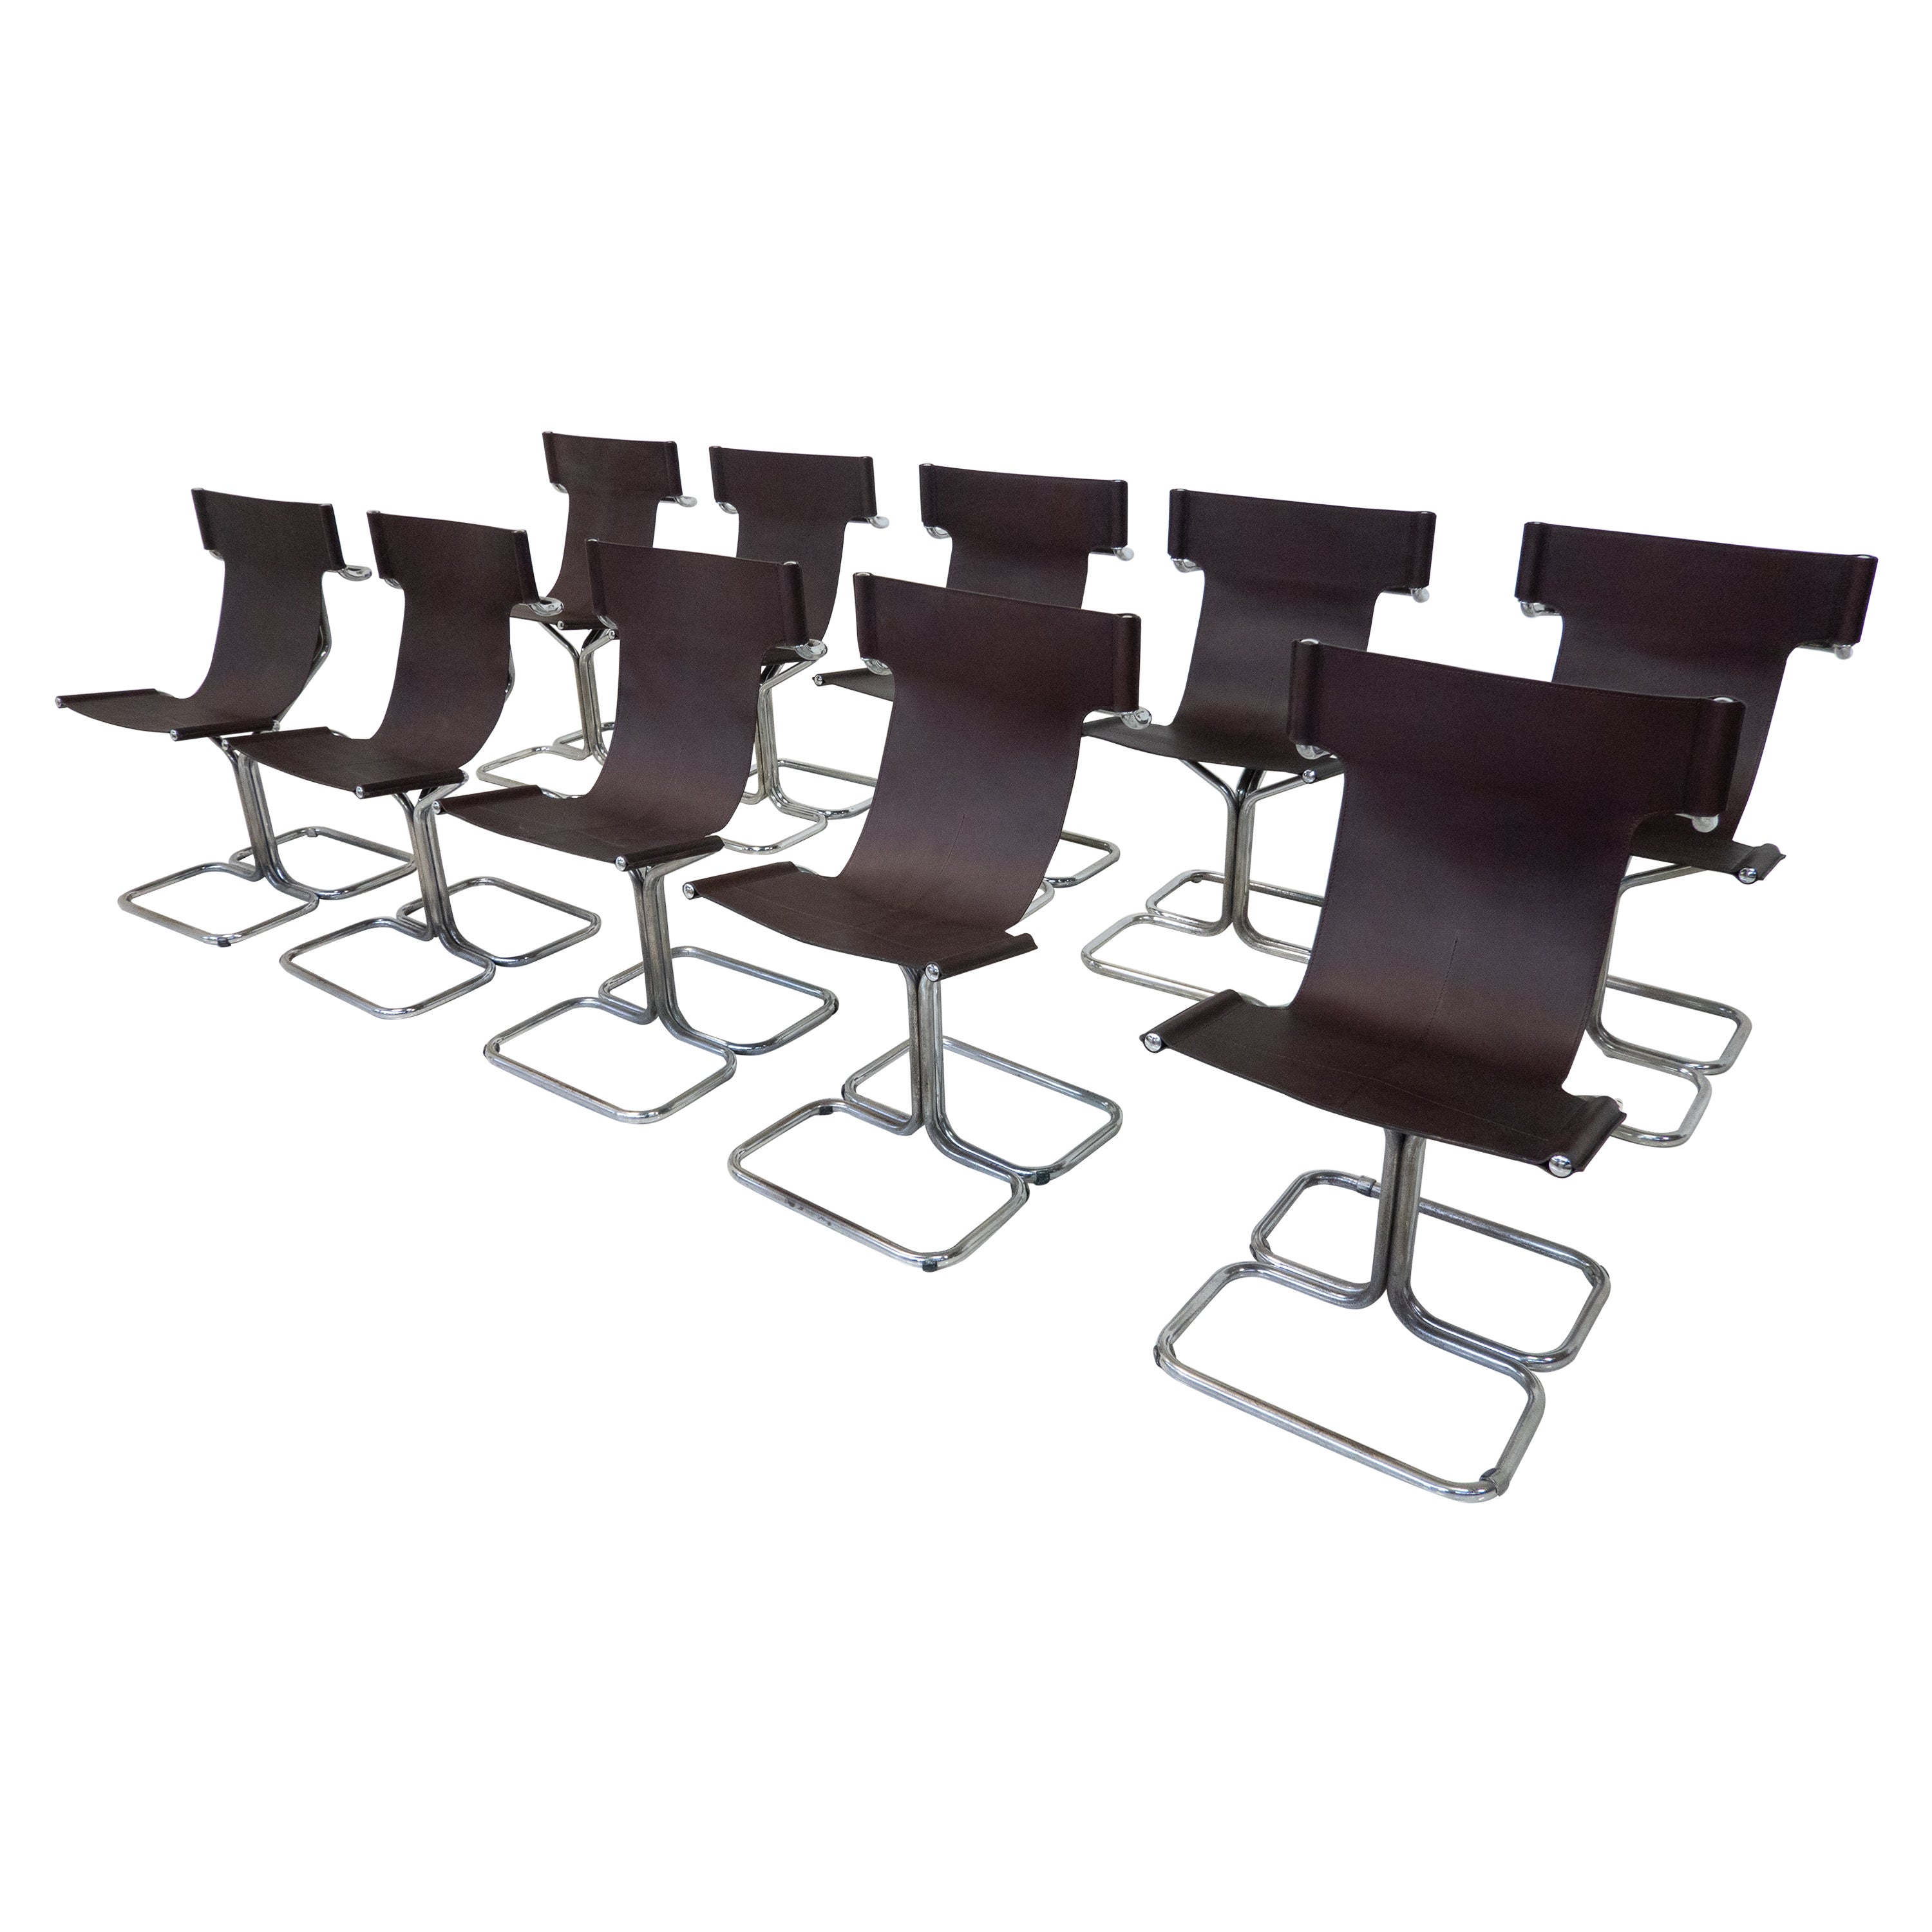 Mid-Century Modern Set of 10 'Topos' Chairs by Gruppo DAM for Busnelli, 1970s For Sale